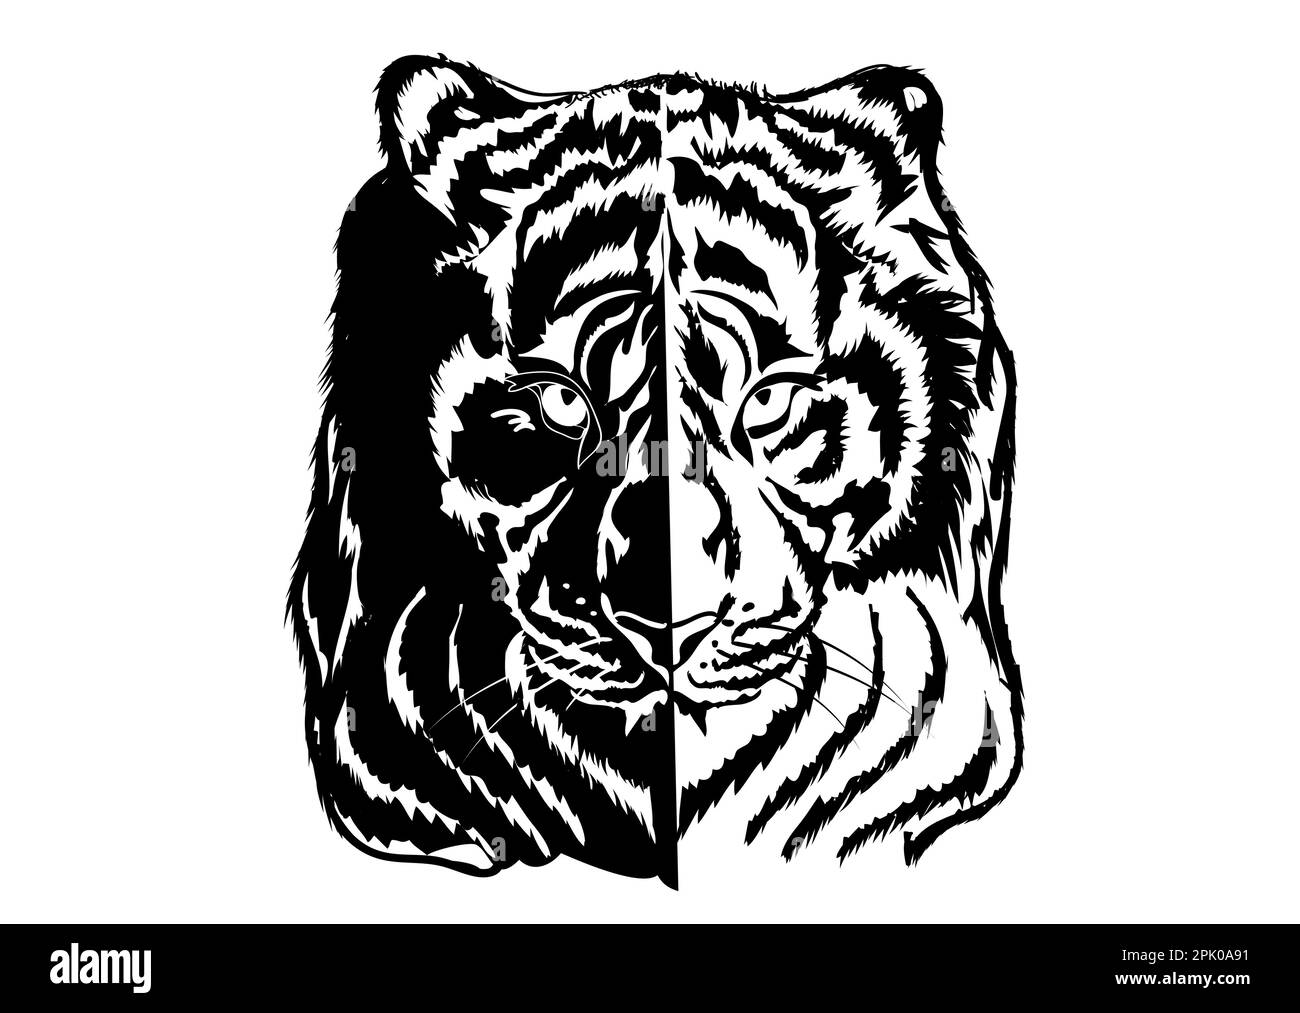 tiger vector illustration isolaed on white background Stock Vector